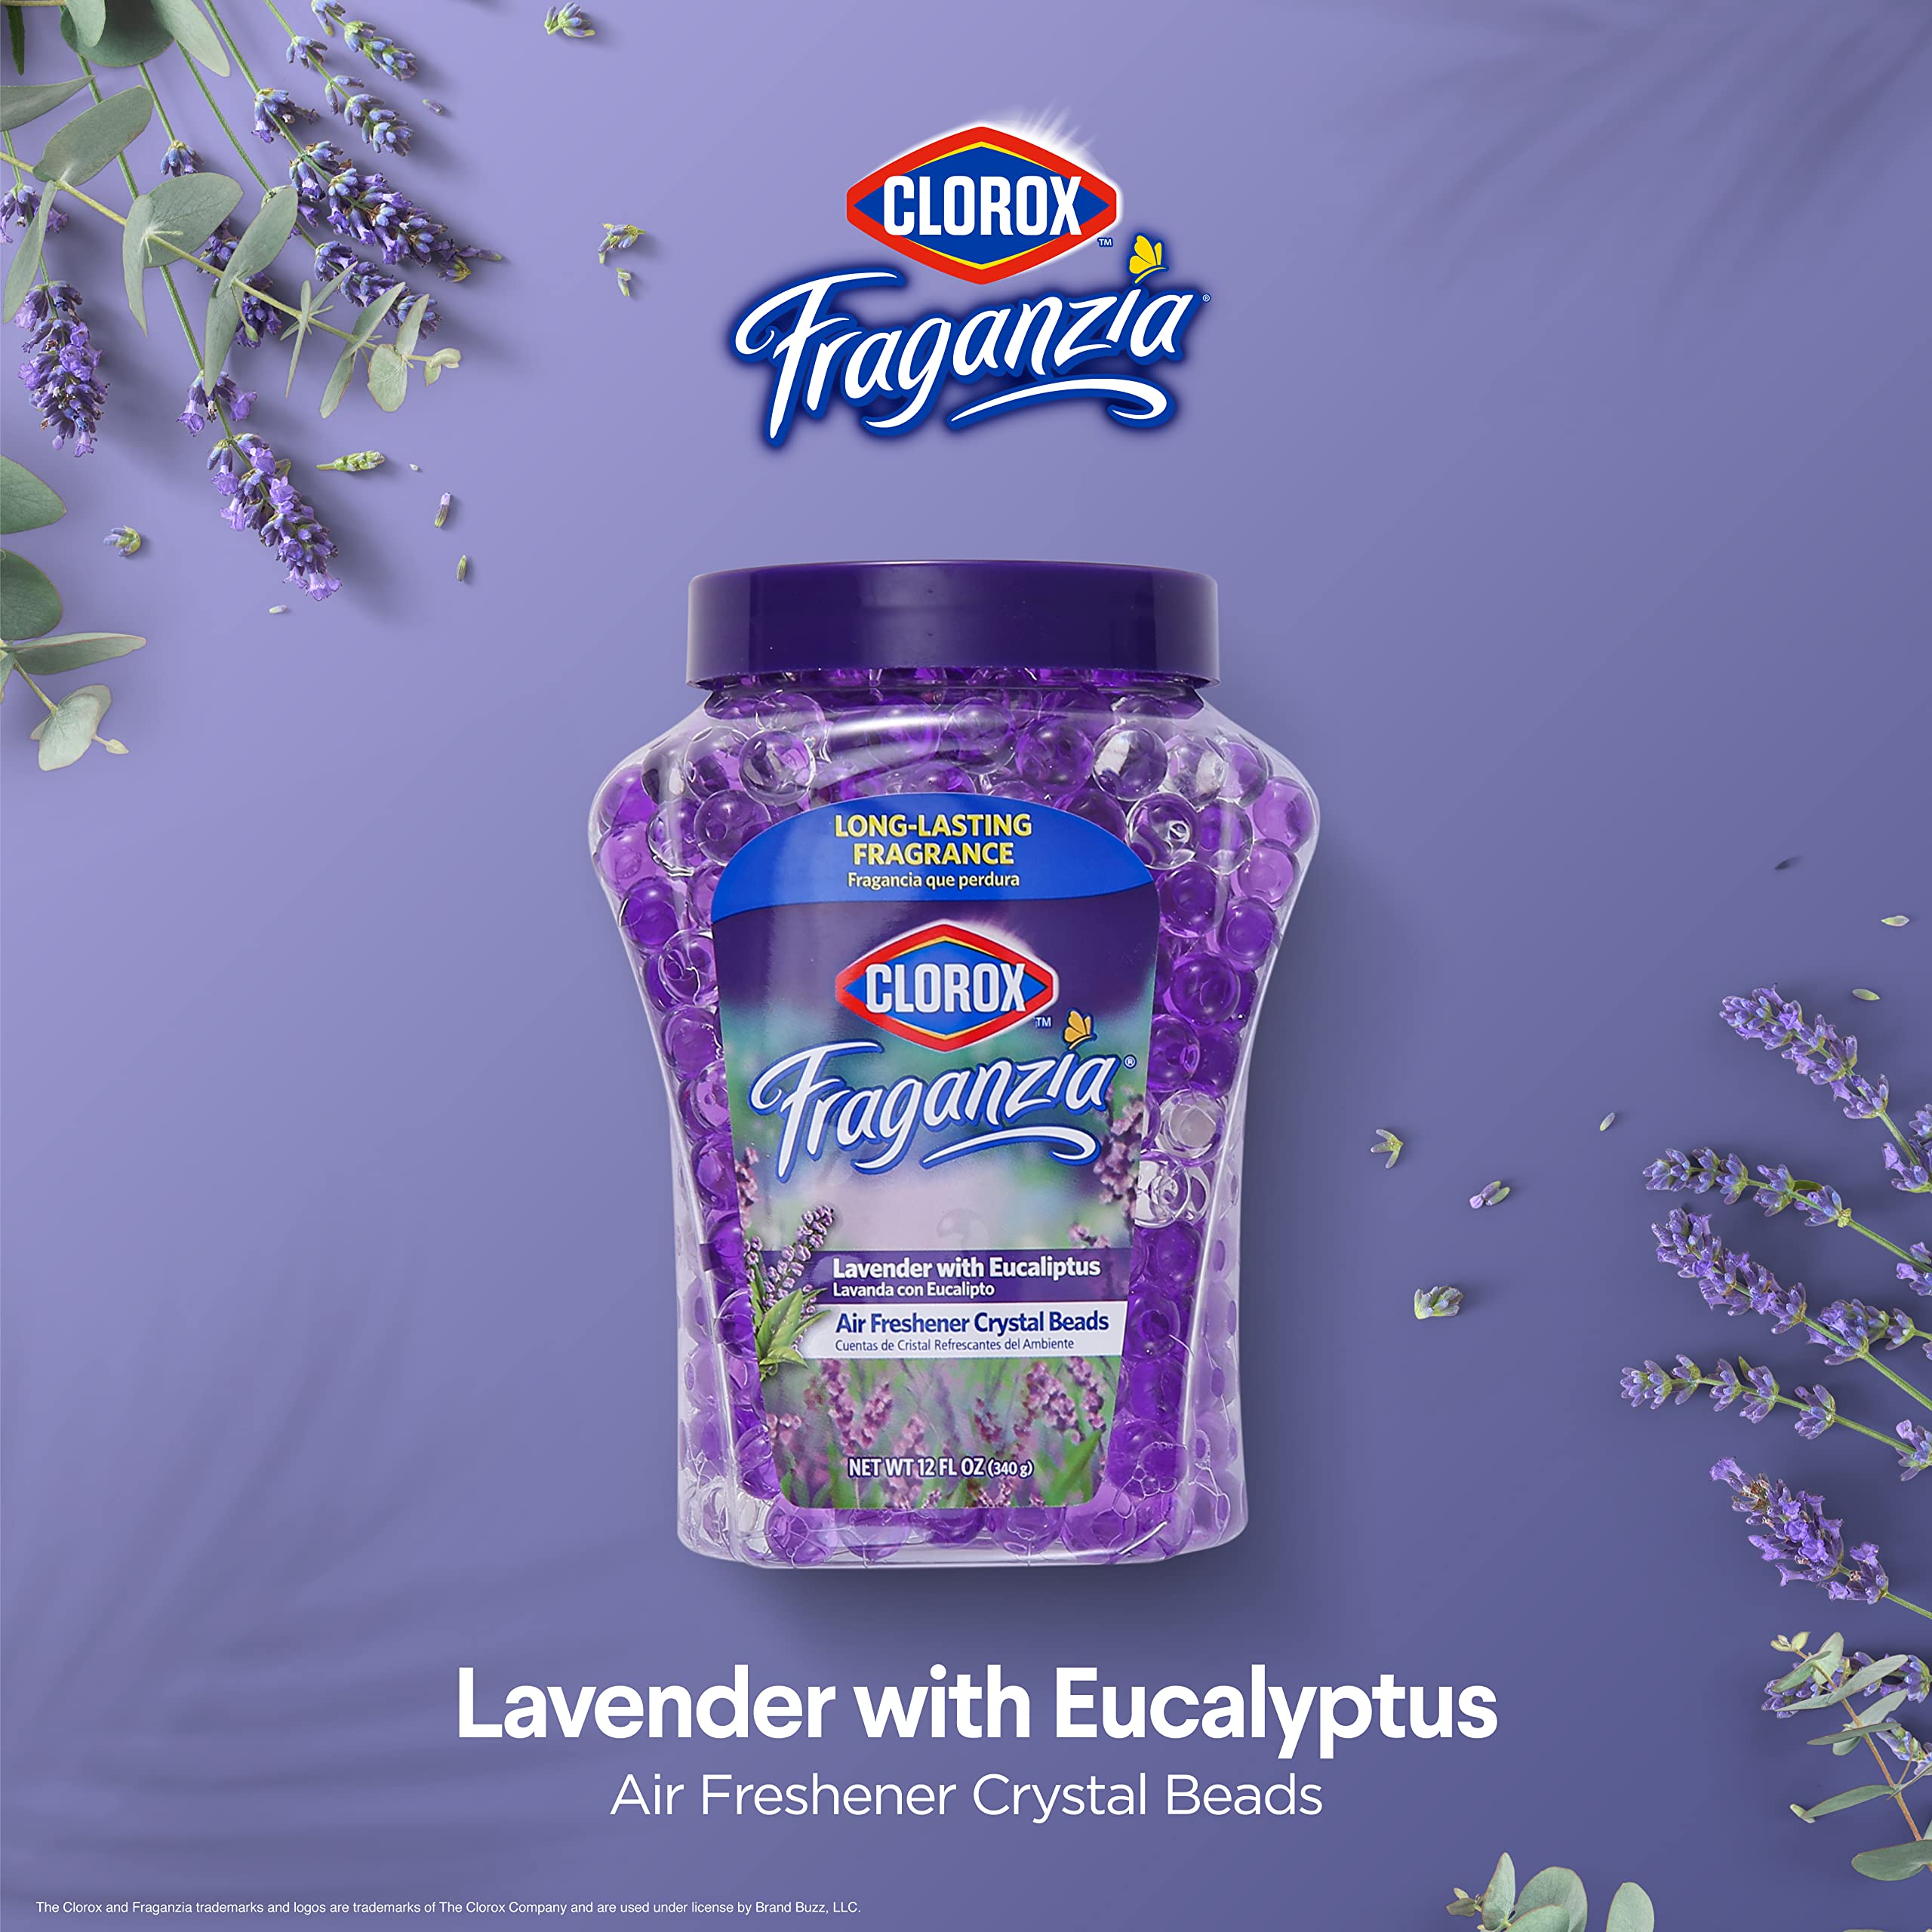 Clorox Fraganzia Air Care Air Freshener Crystal Beads in Lavender with Eucalpytus Scent Scent, 12 Ounces | Lavender Eucalyptus Scented Air Freshener Gel Beads from Clorox Fraganzia for Car or Home